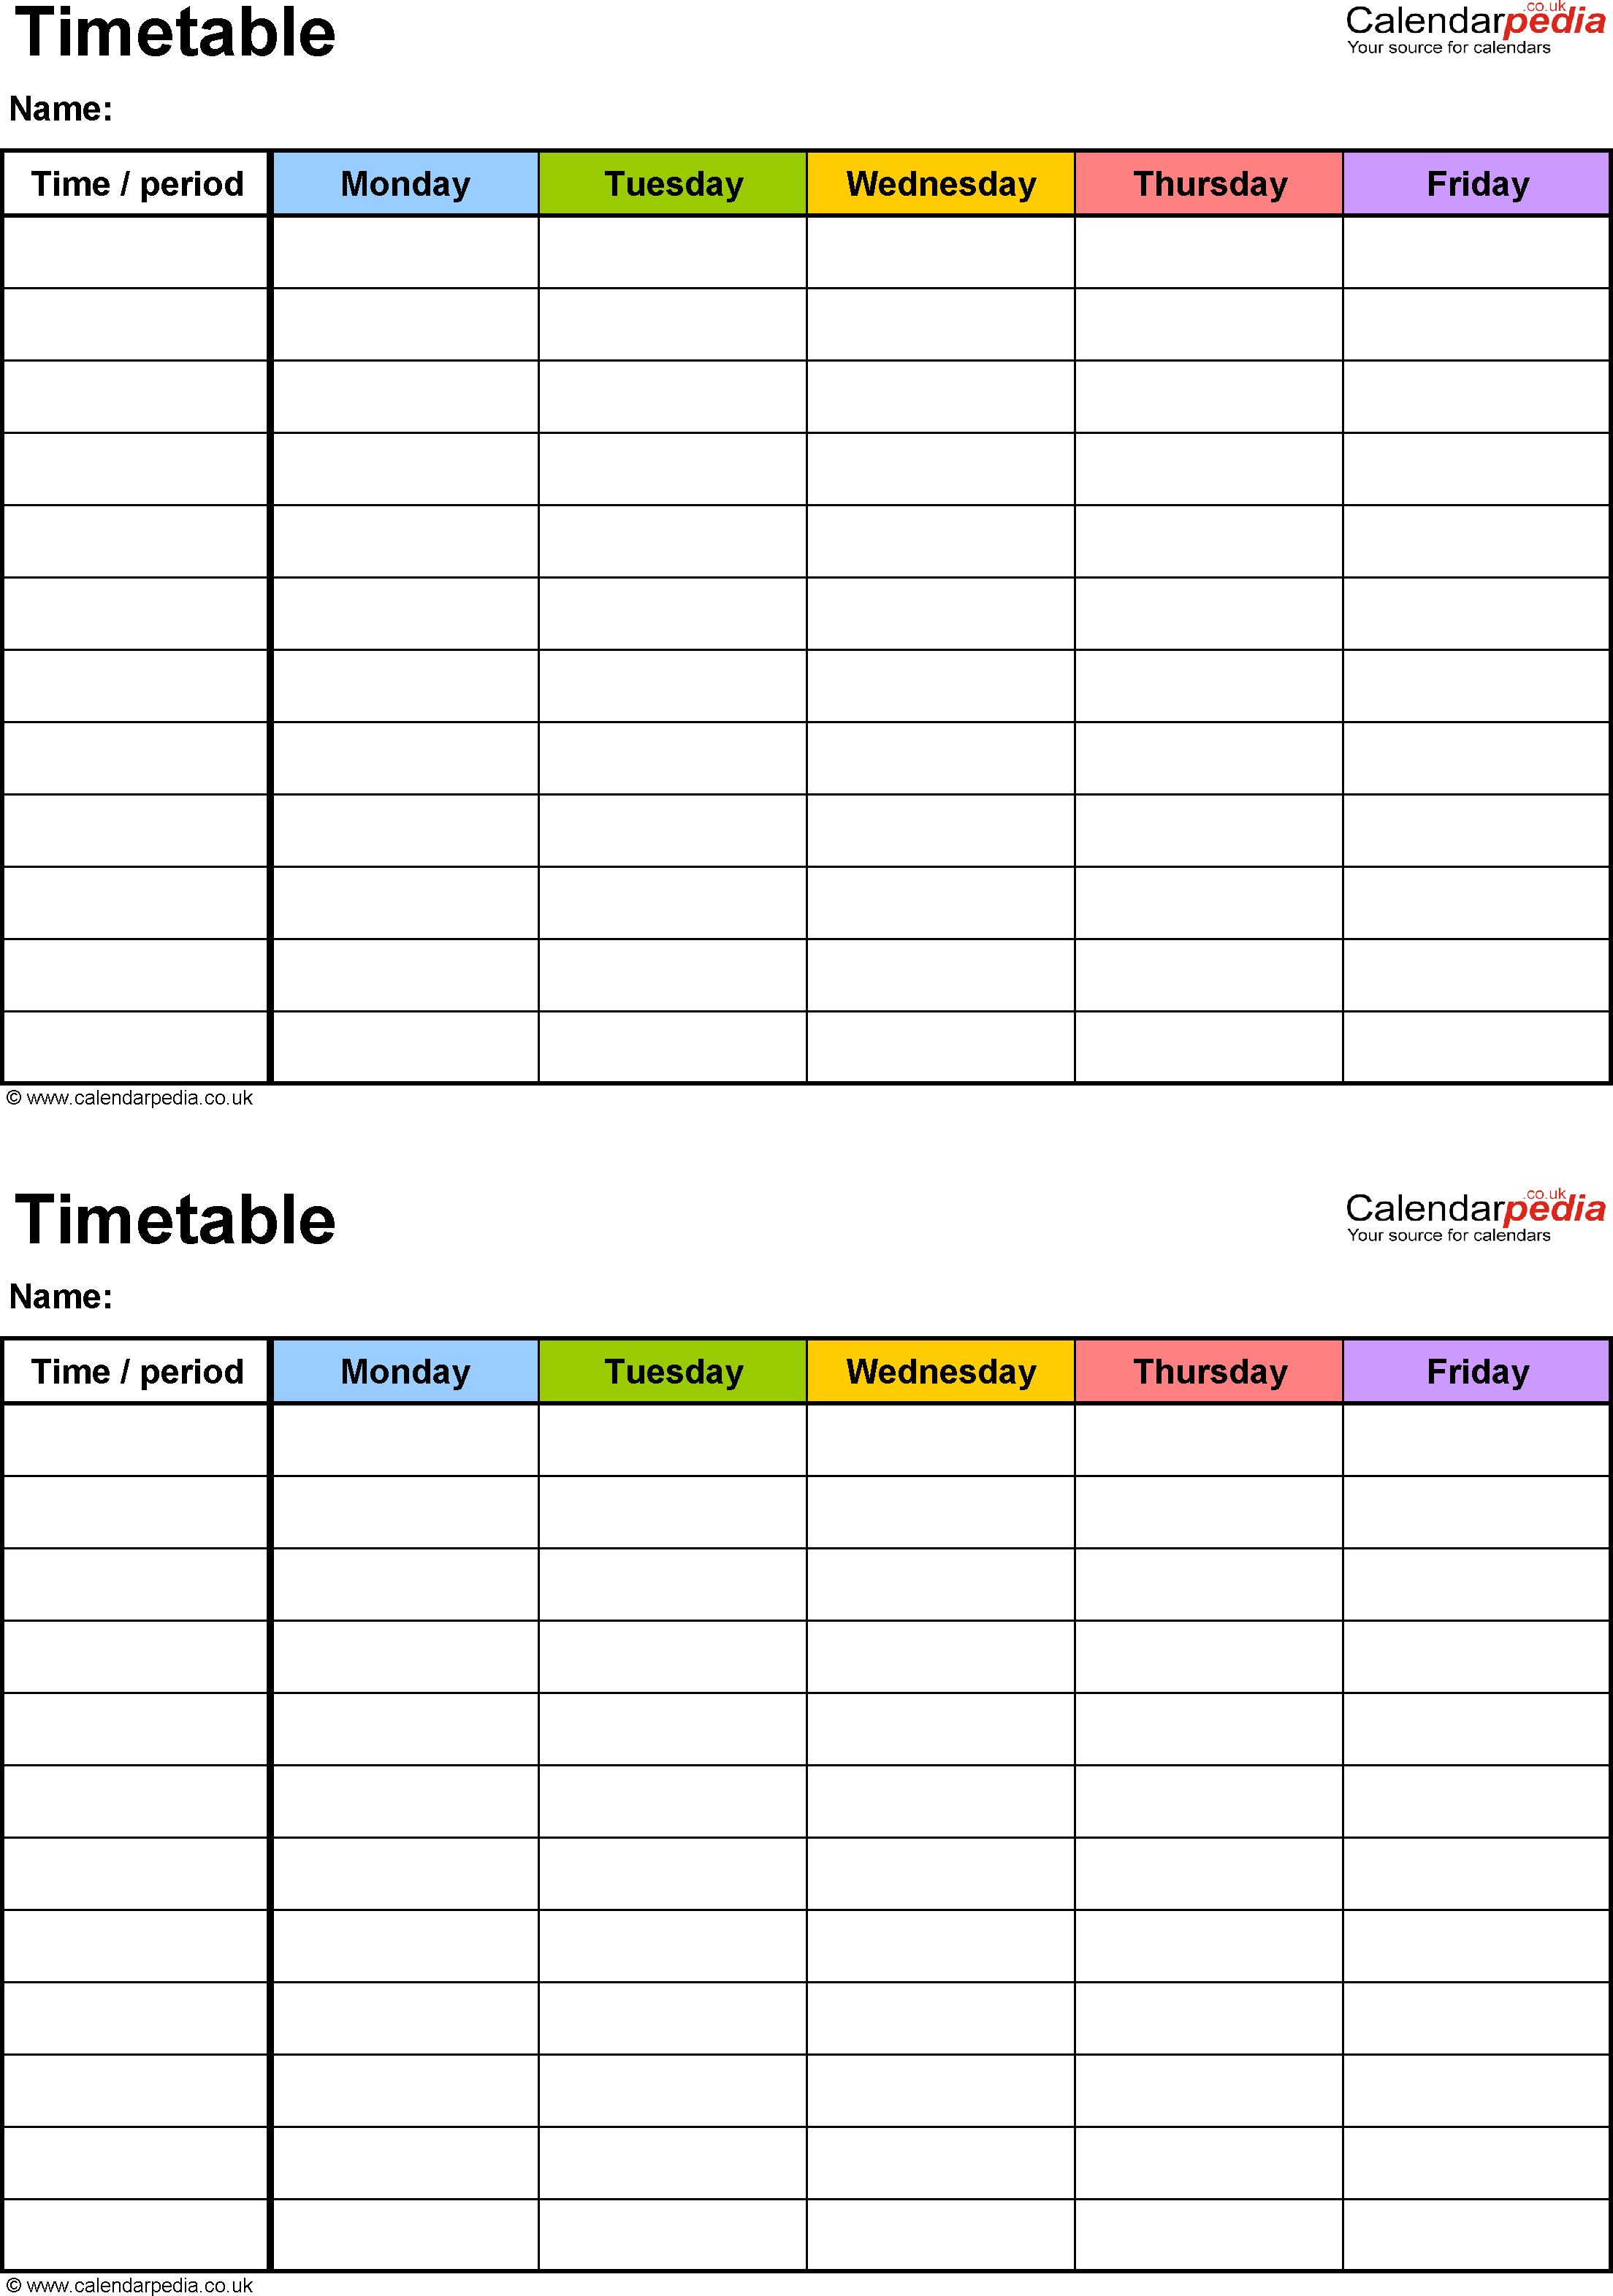 Excel Timetable Template 6: 2 A5 Timetables On One Page in Printable 5 Day Week Calendar